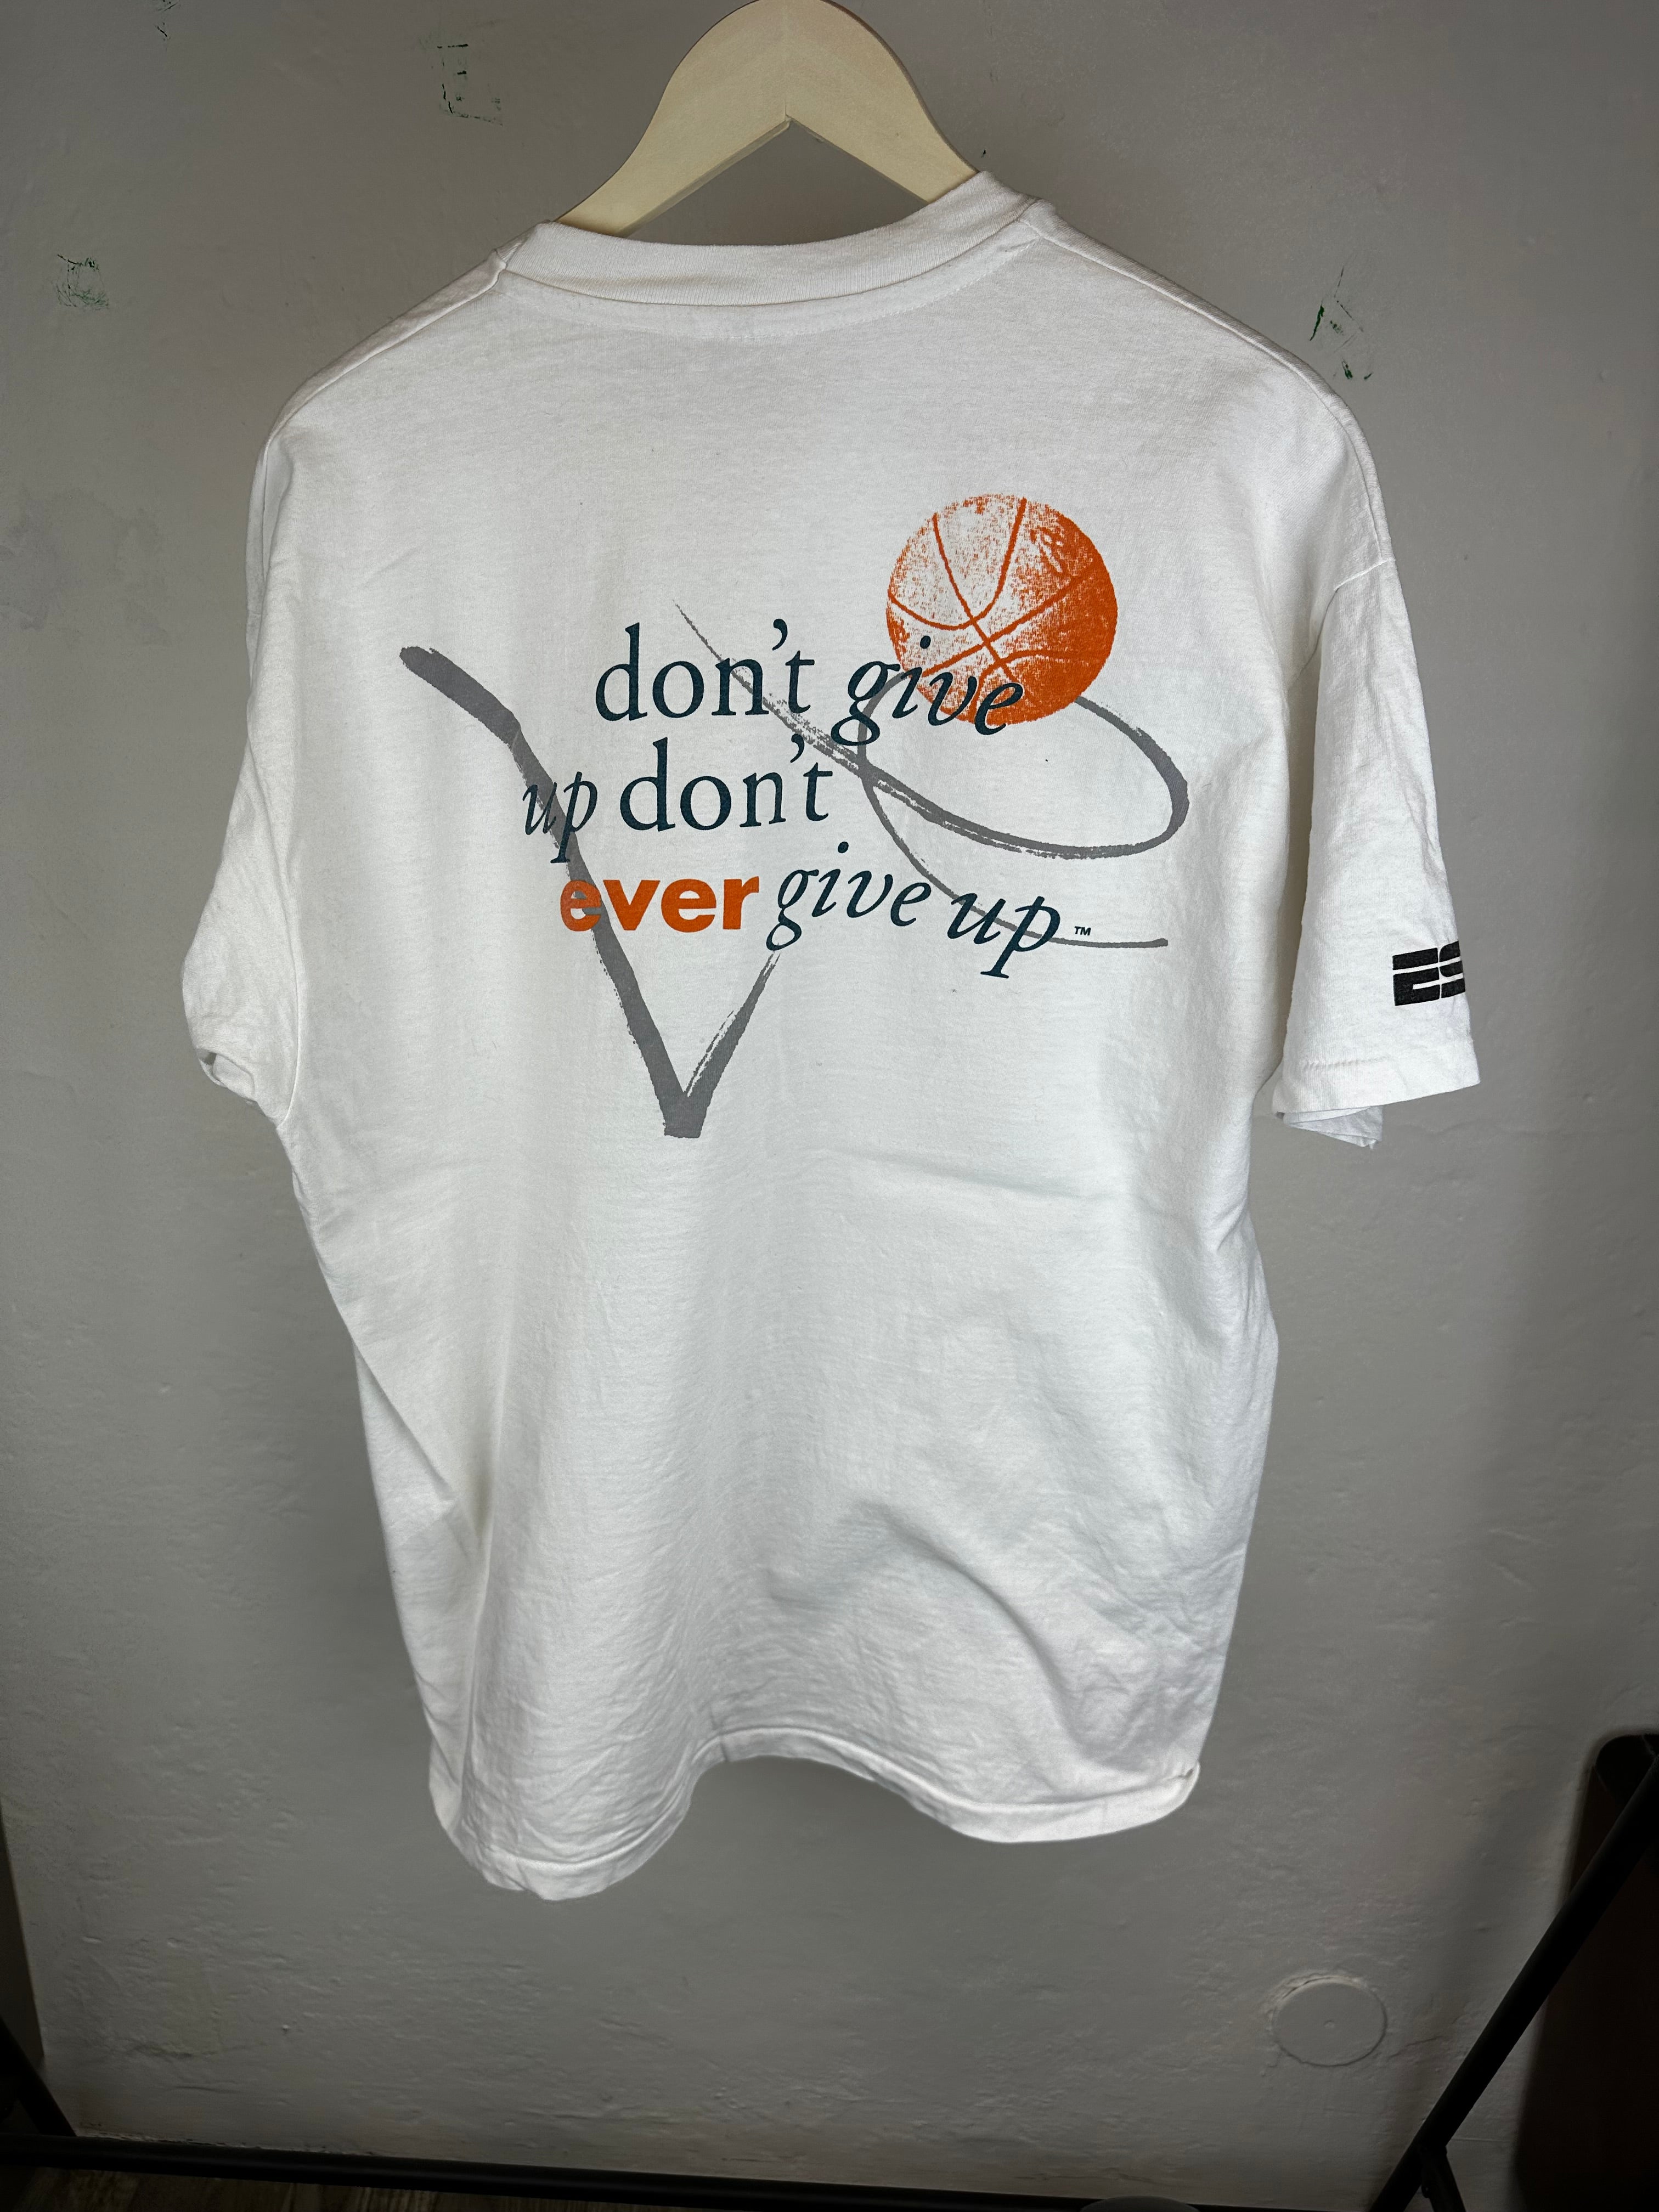 Vintage Don’t give up t-shirt - size XL